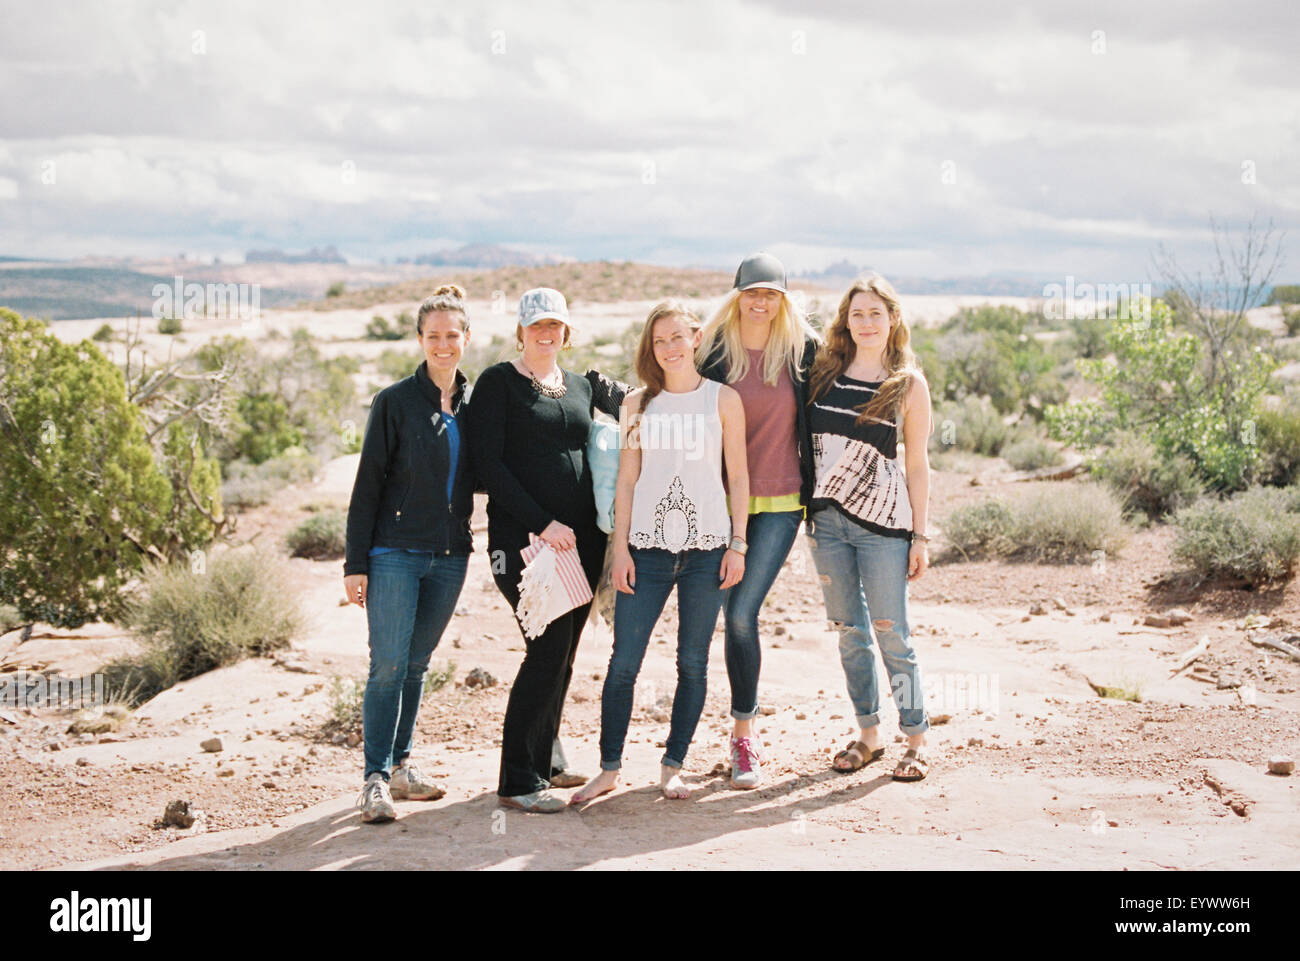 Group of five women, friends standing side by side in a desert landscape smiling. Stock Photo